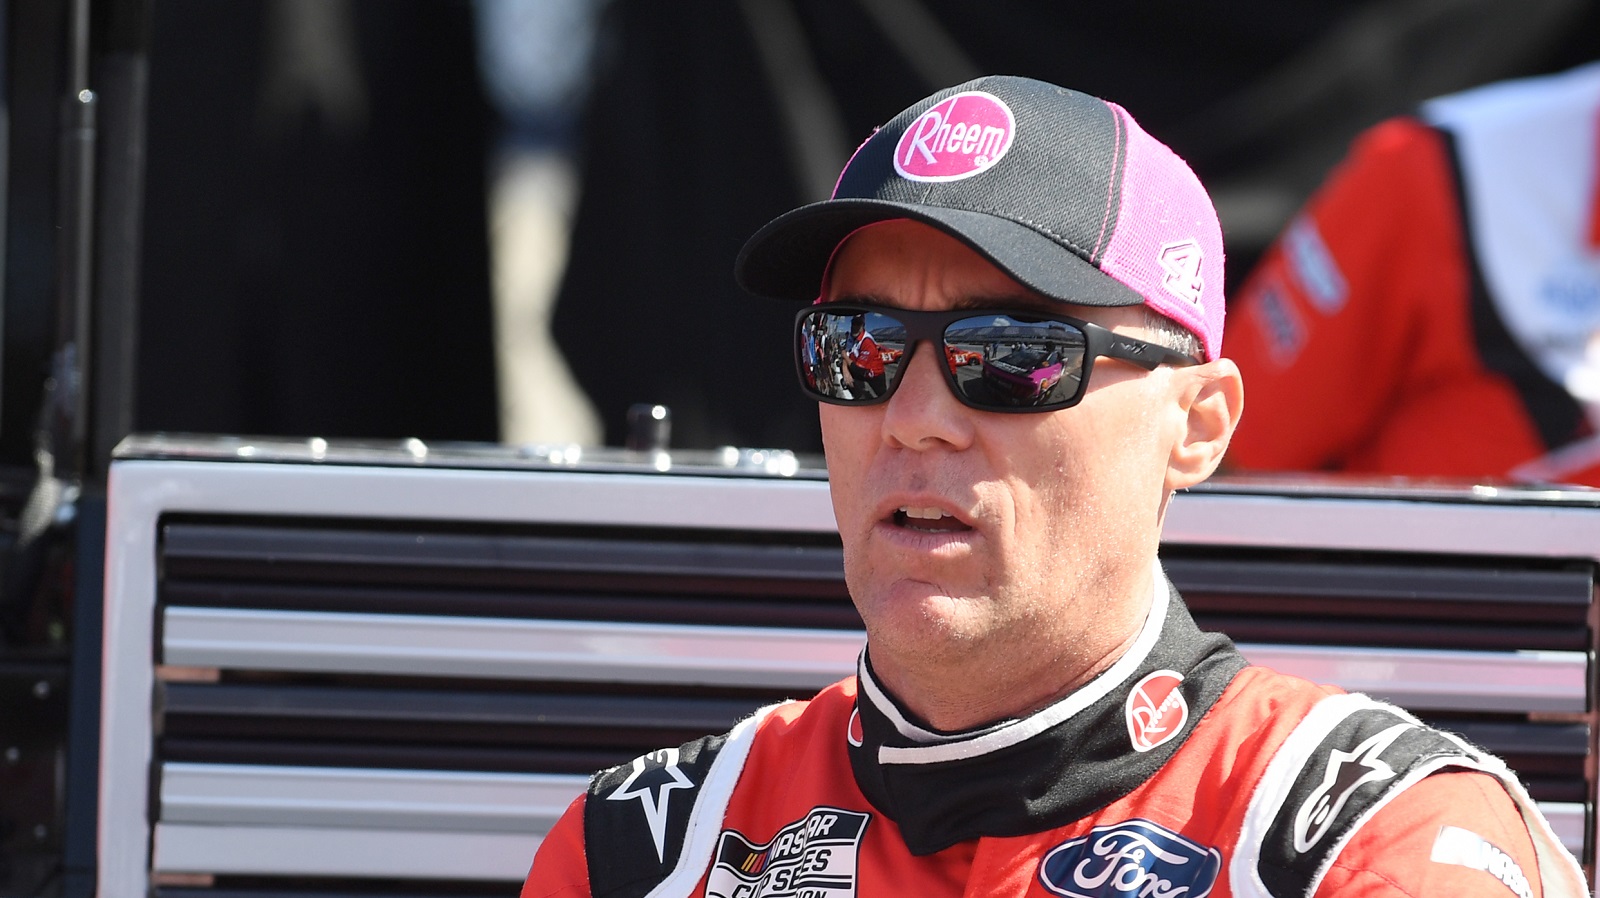 Kevin Harvick looks on during practice for the NASCAR Cup Series Goodyear 400 on May 7, 2022, at Darlington Raceway. |  Jeffrey Vest/Icon Sportswire via Getty Images